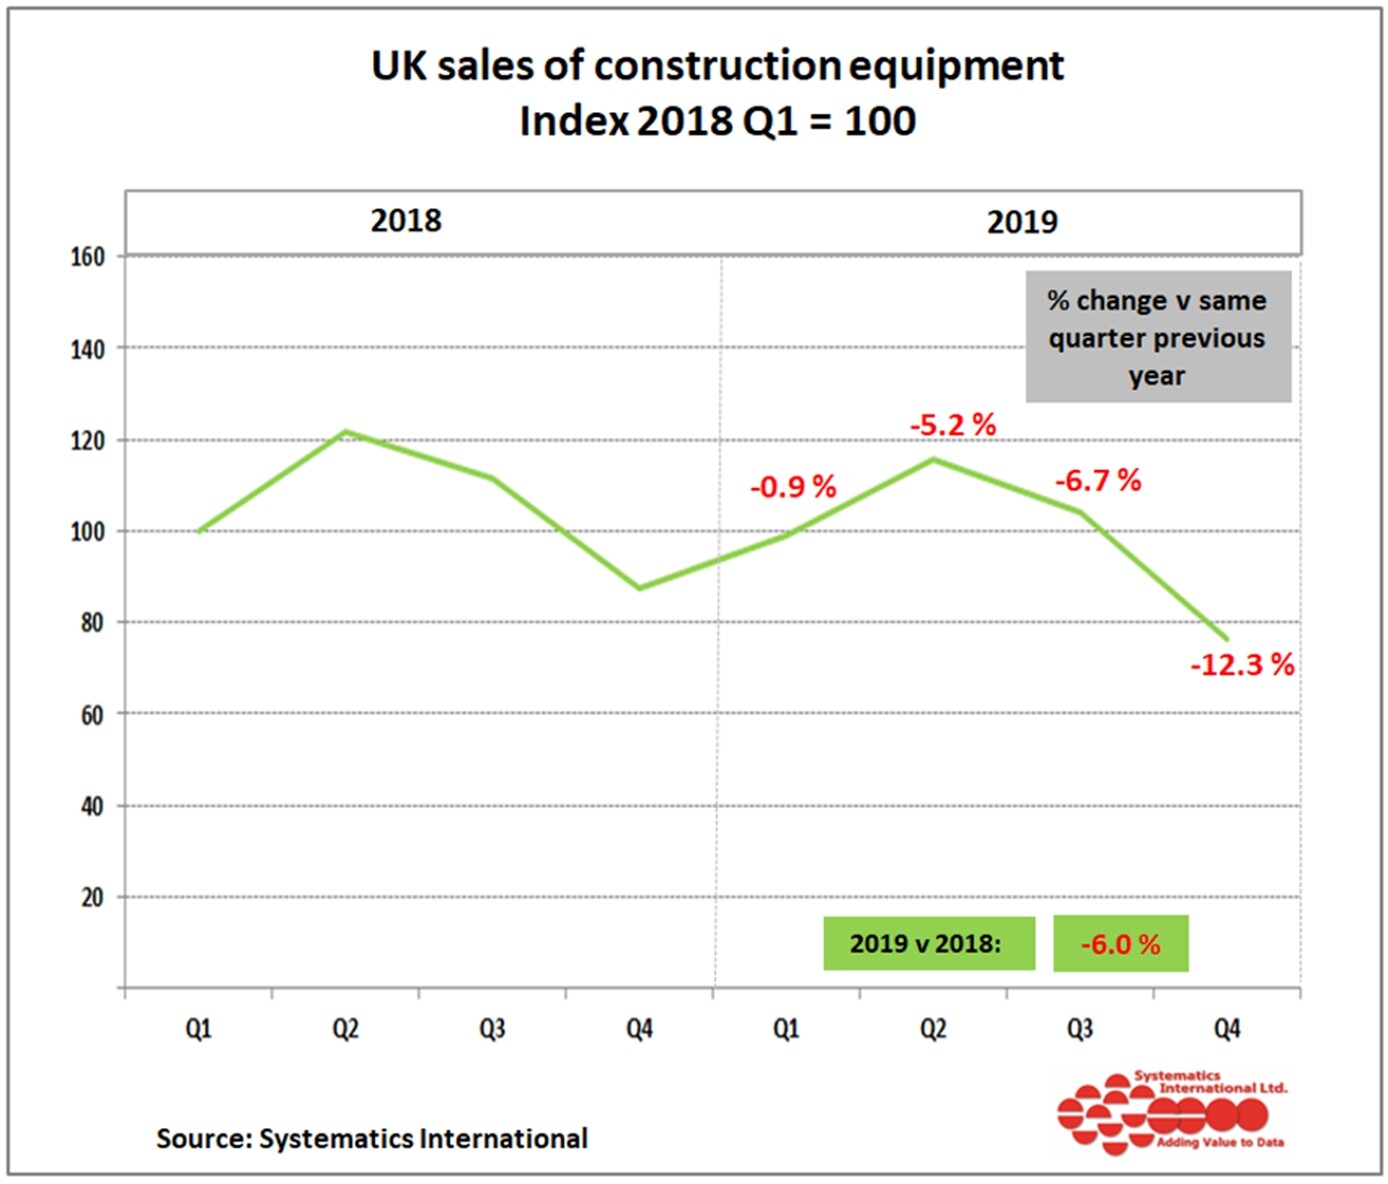 Construction equipment sales fell 6% in 2019